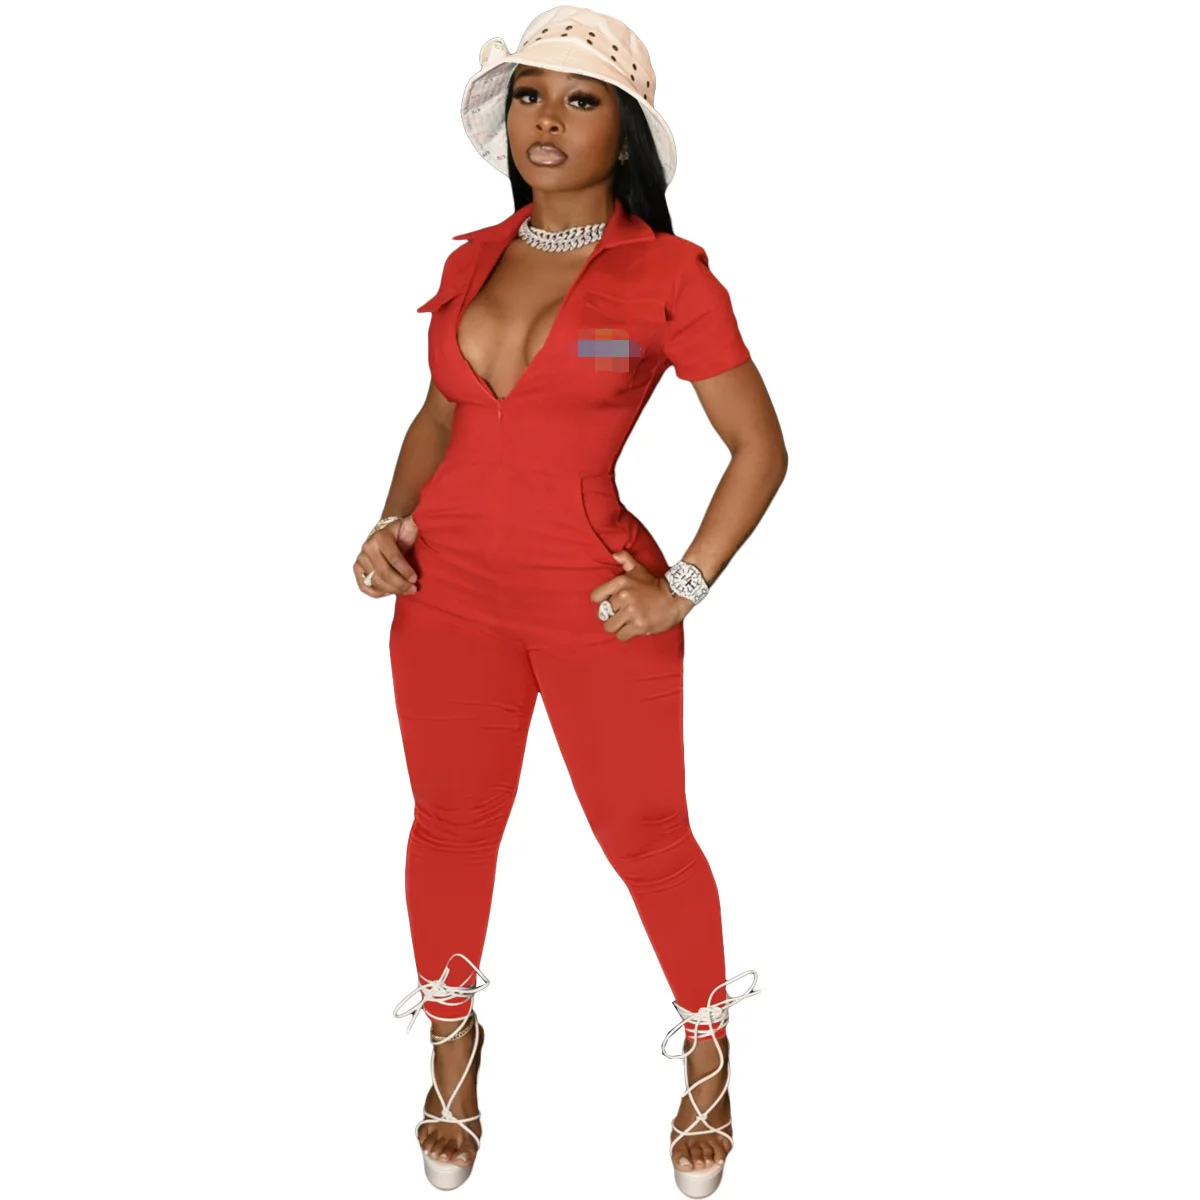 

Dickie Suit Clothing Women Outfits Sexy Playsuit Uniform Long Pants Back Zipper Solid Color Jumpsuits Women Dickie, As show